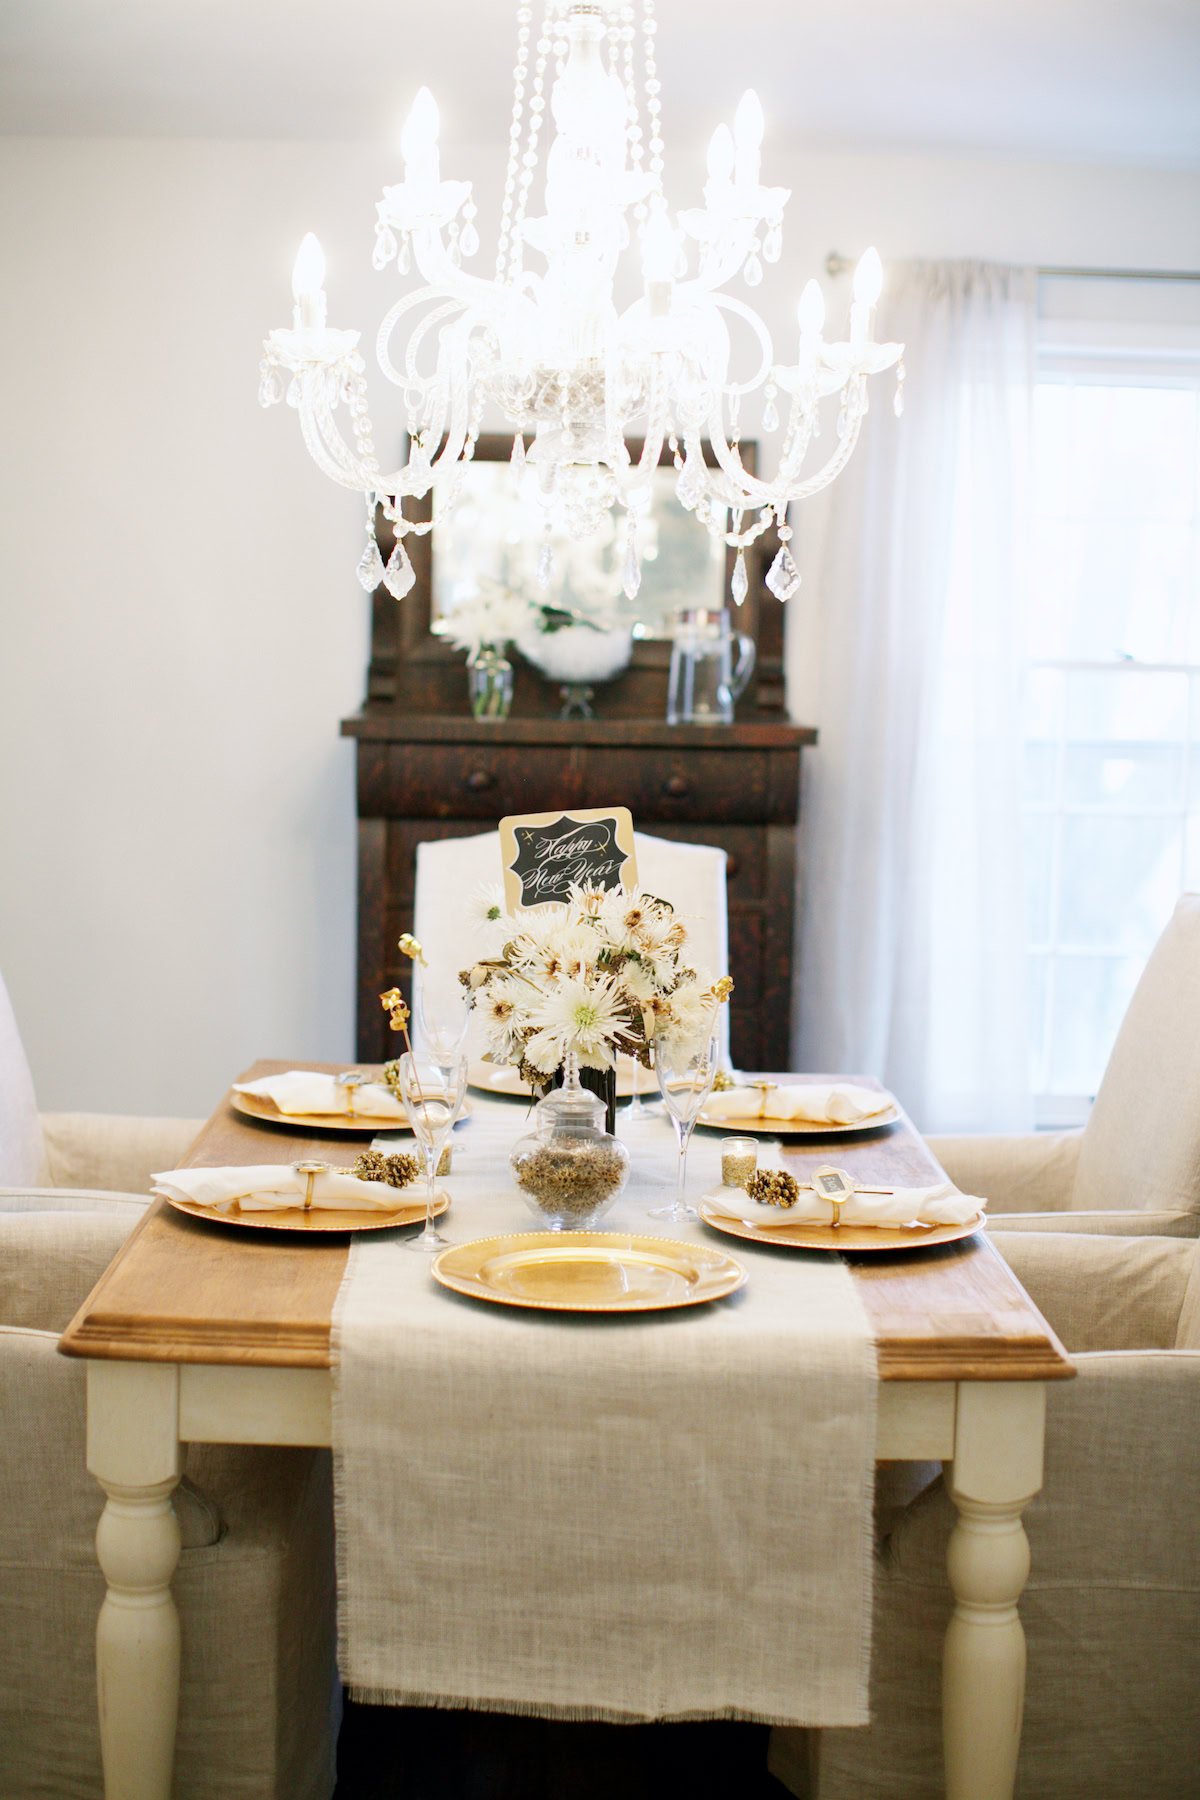 A dining table set for four with gold-trimmed plates, glasses, and a white floral centerpiece beneath a chandelier in a bright room painted in Sherwin Williams Accessible Beige, with a window and cabinet in the background.